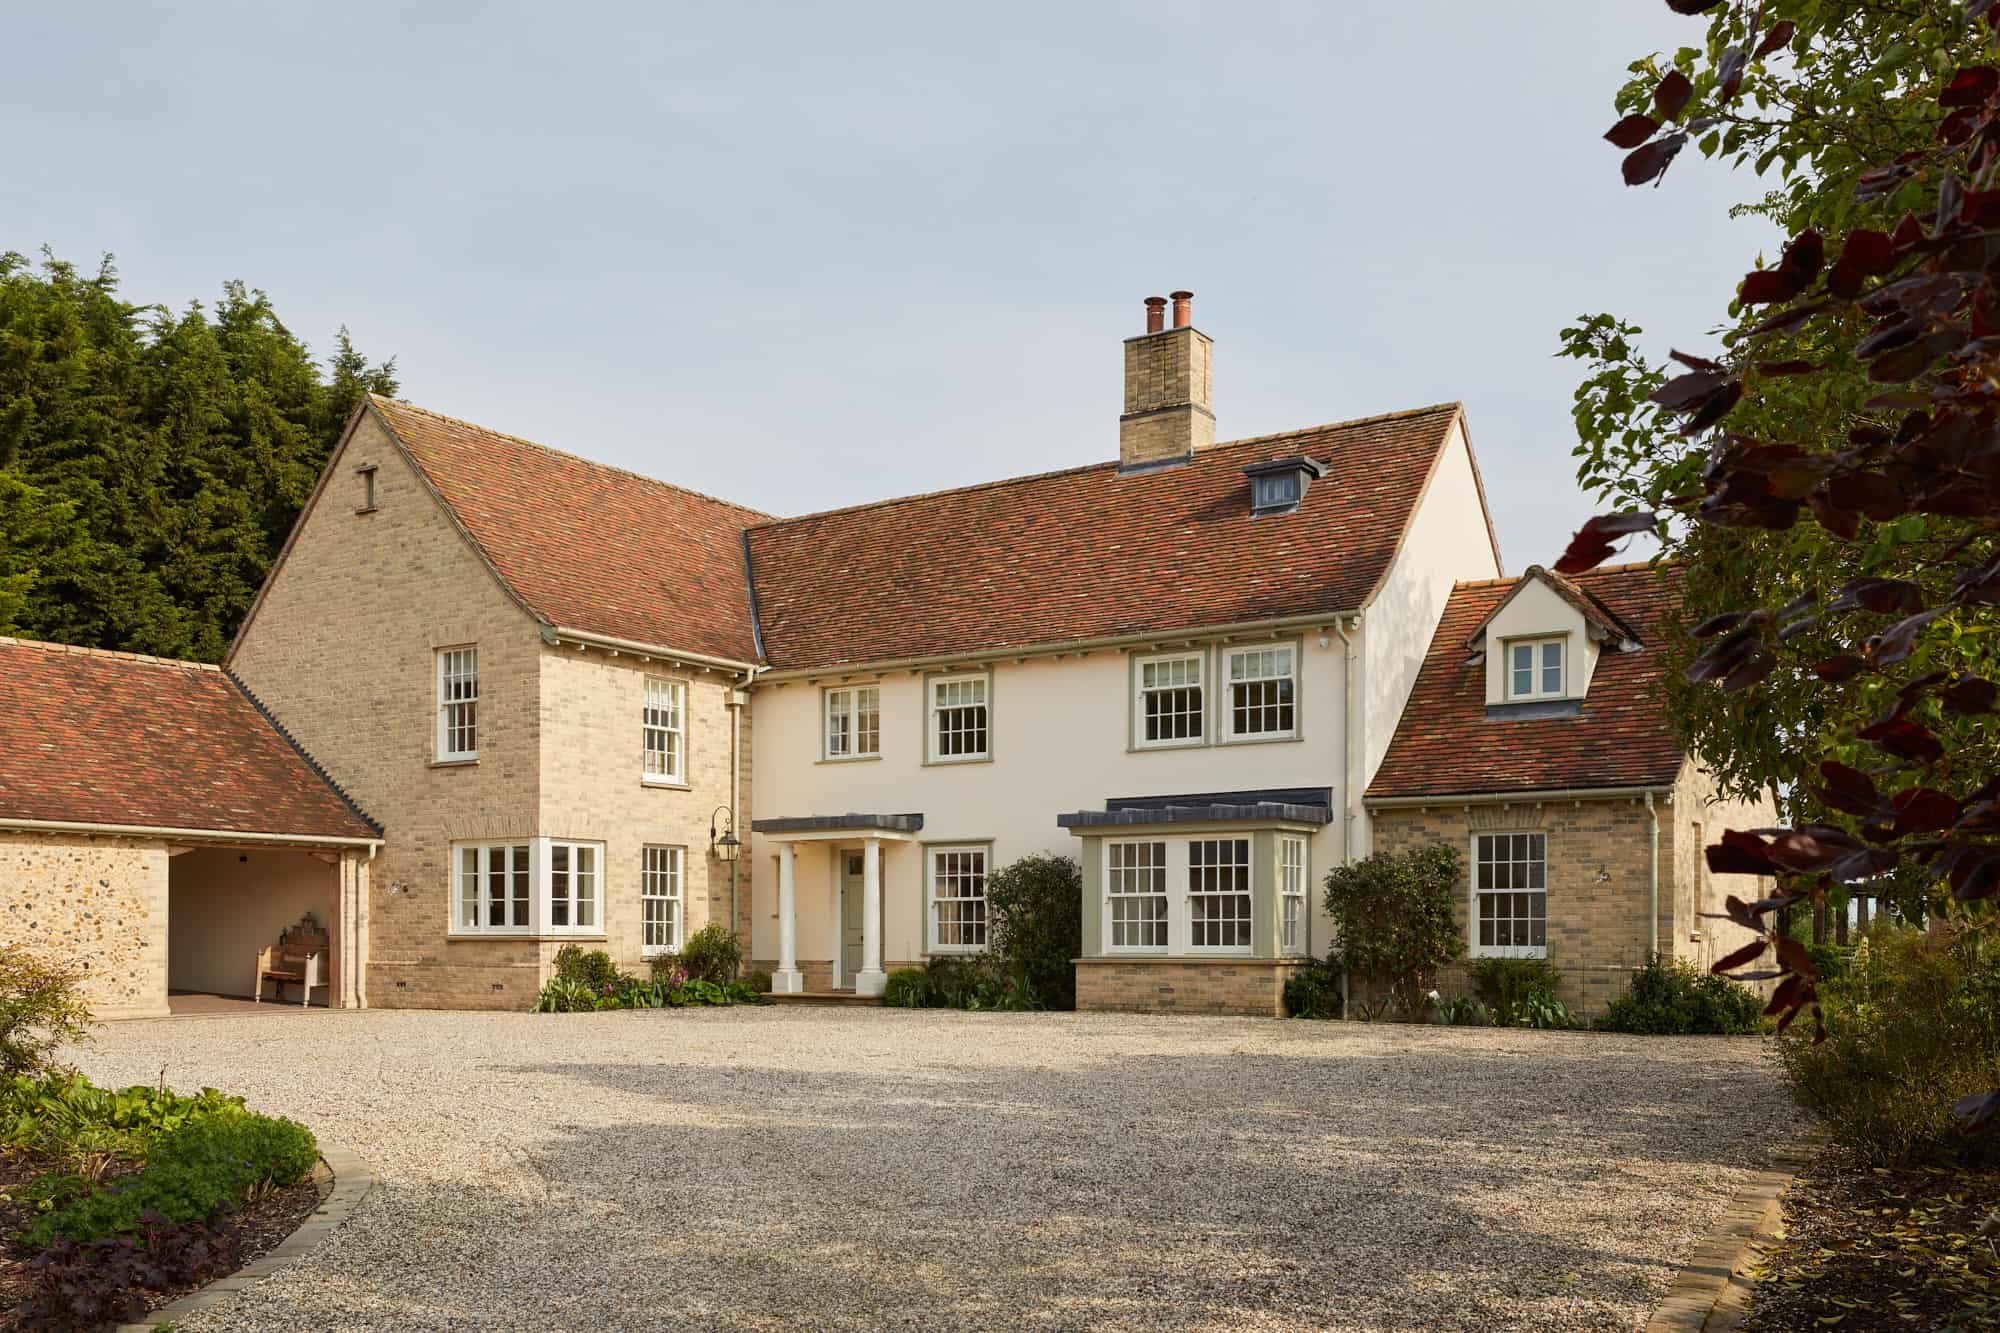 Barrington CB22 - A beautifully designed new build property in the style of a Suffolk farmhouse, with authentic paired back interiors and landscaped gardens - The Location Guys